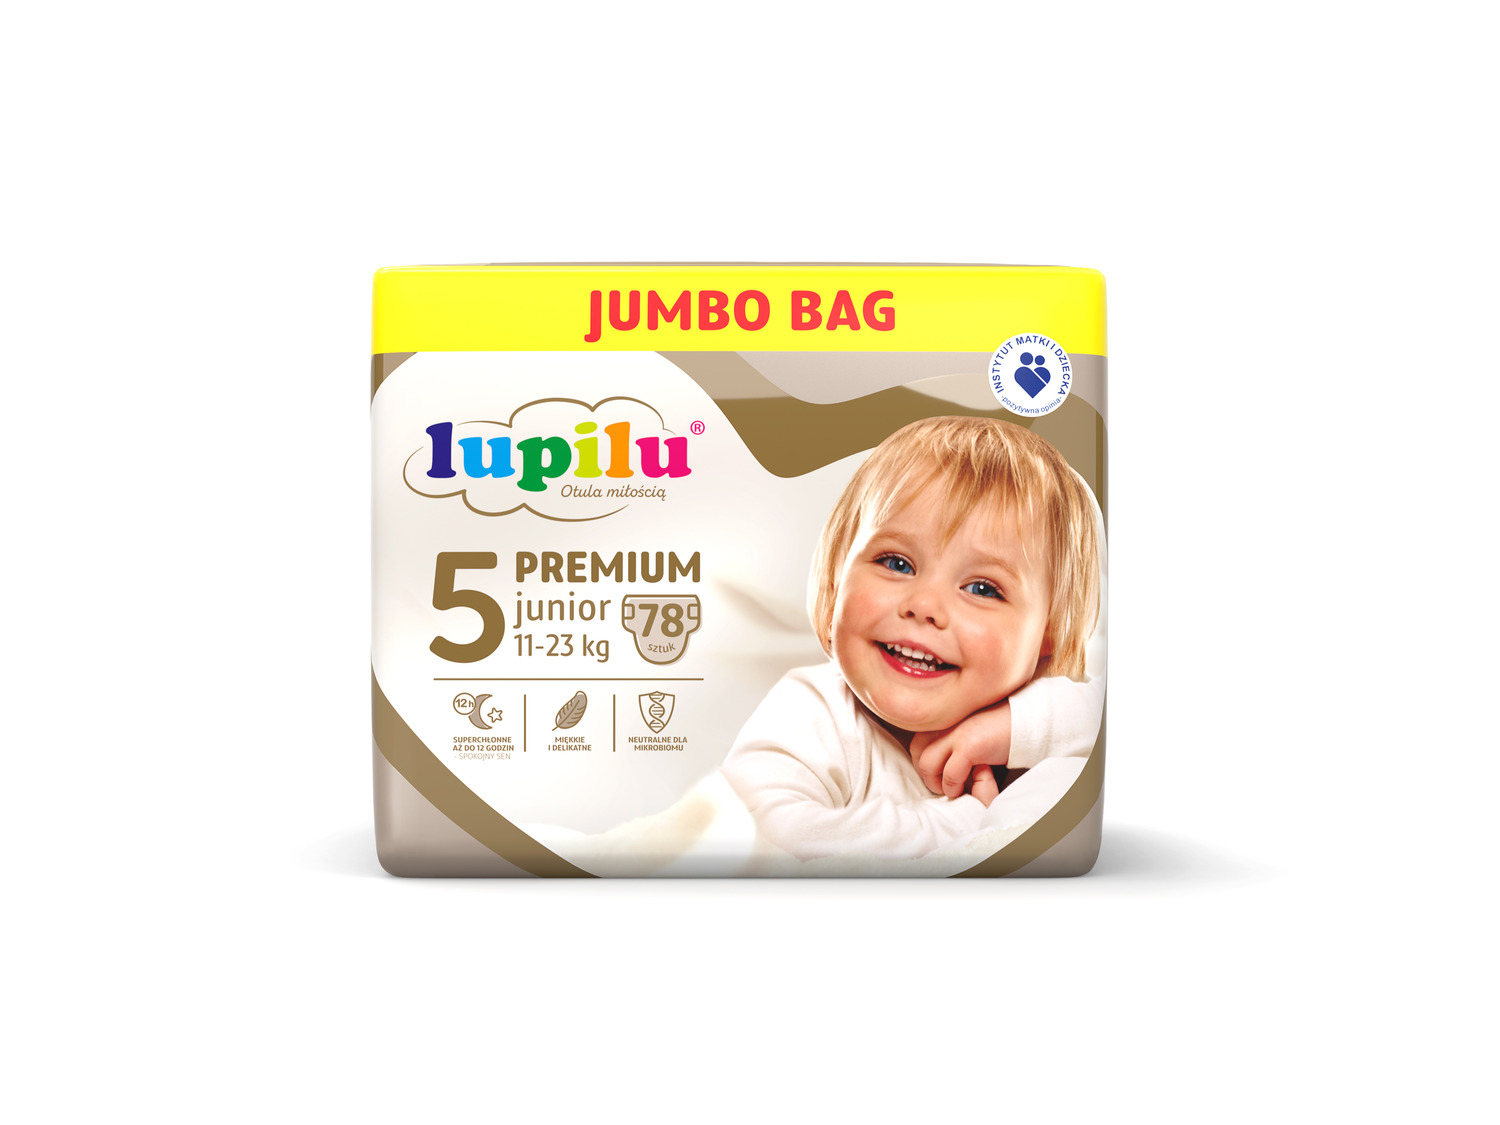 j140w pampers